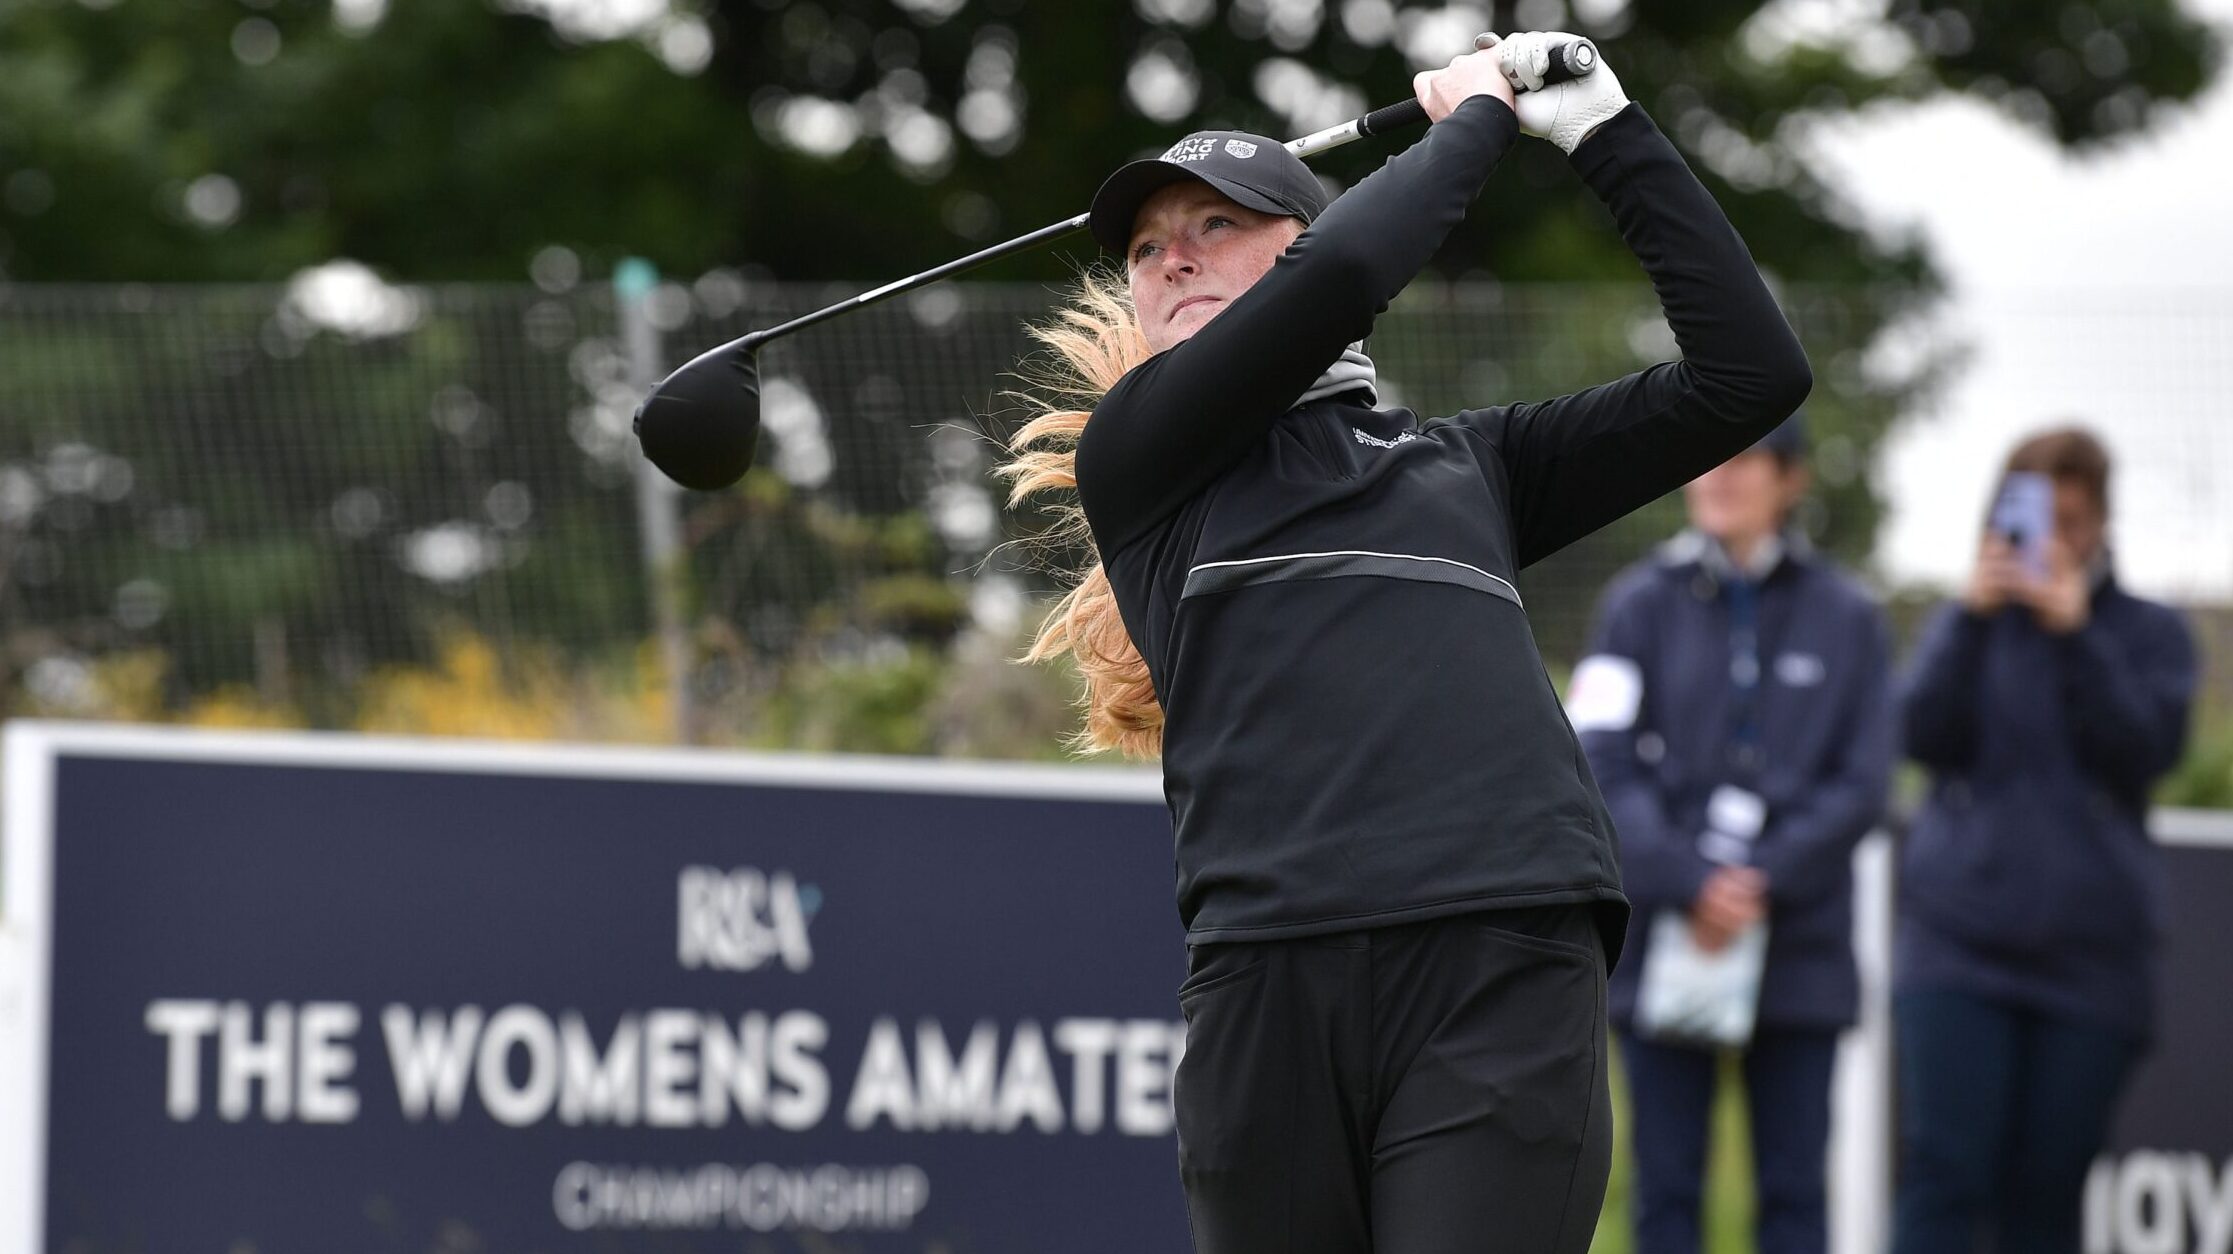 PLUMB DRAW: Louise Duncan will play alongside 2018 champion Georgia Hall in the first round of the Women's Open at Carnoustie